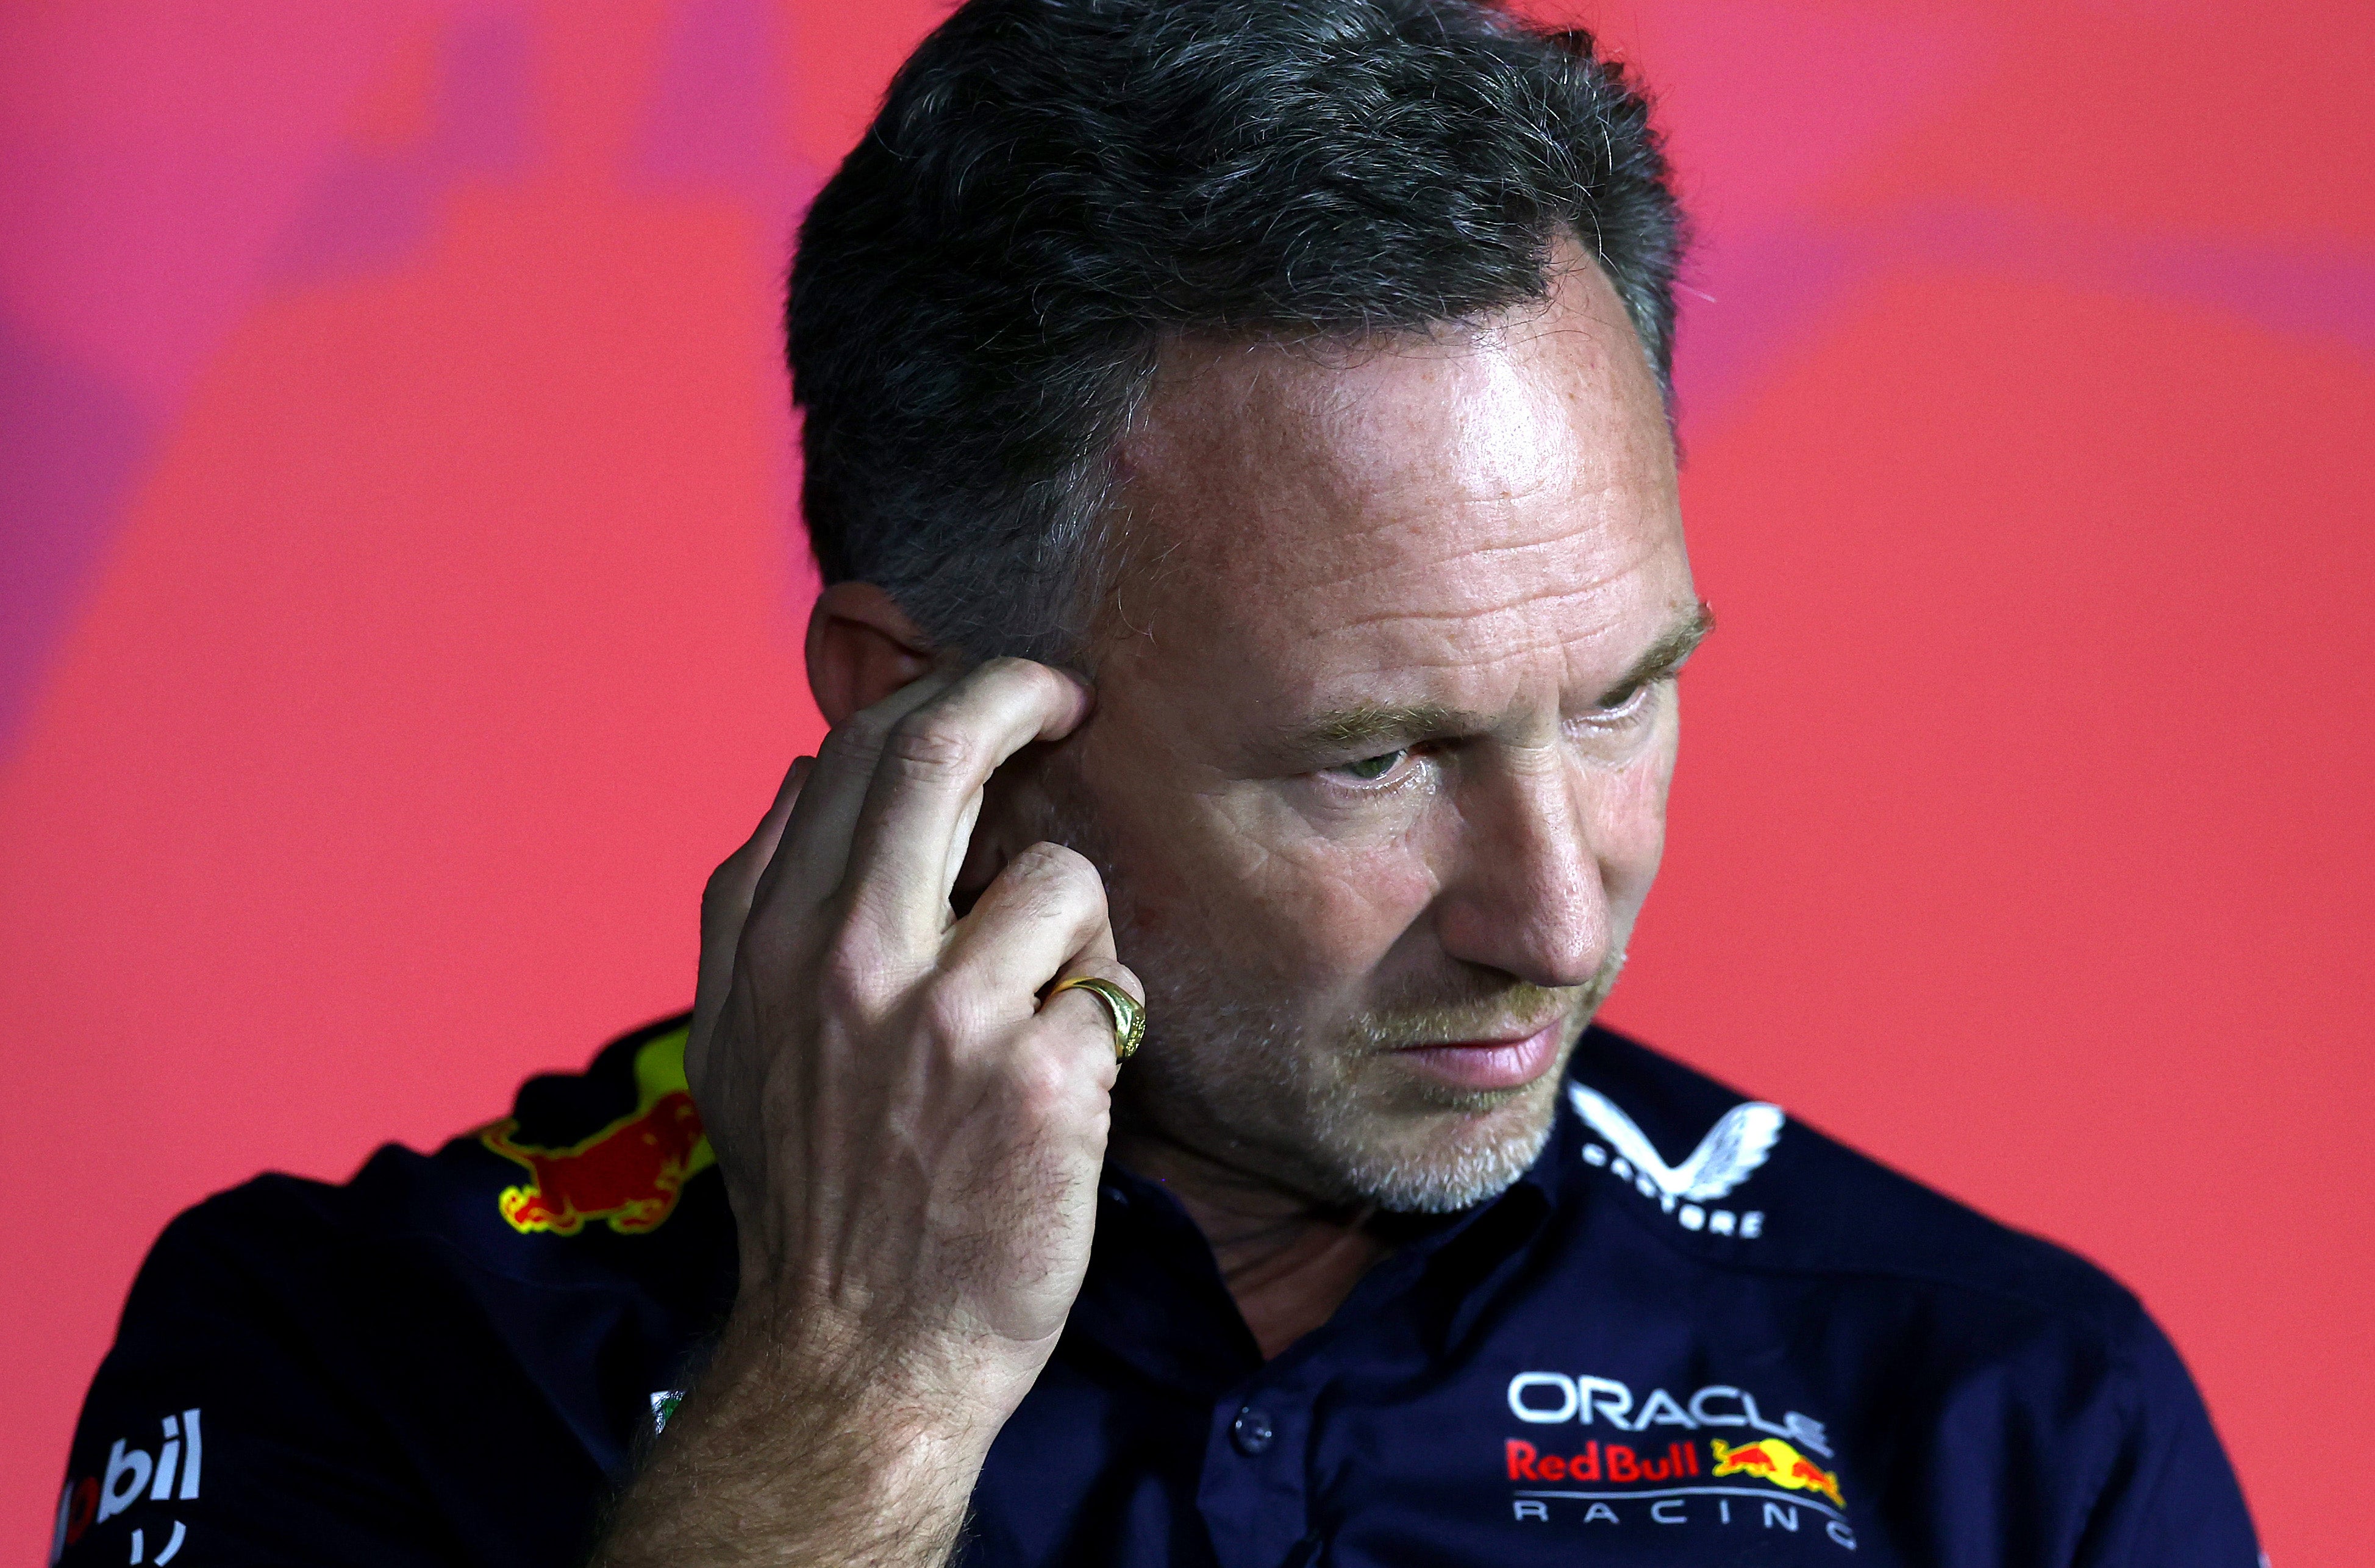 Christian Horner will get to keep his ridiculously well-paid job, and the power and respect that comes with it